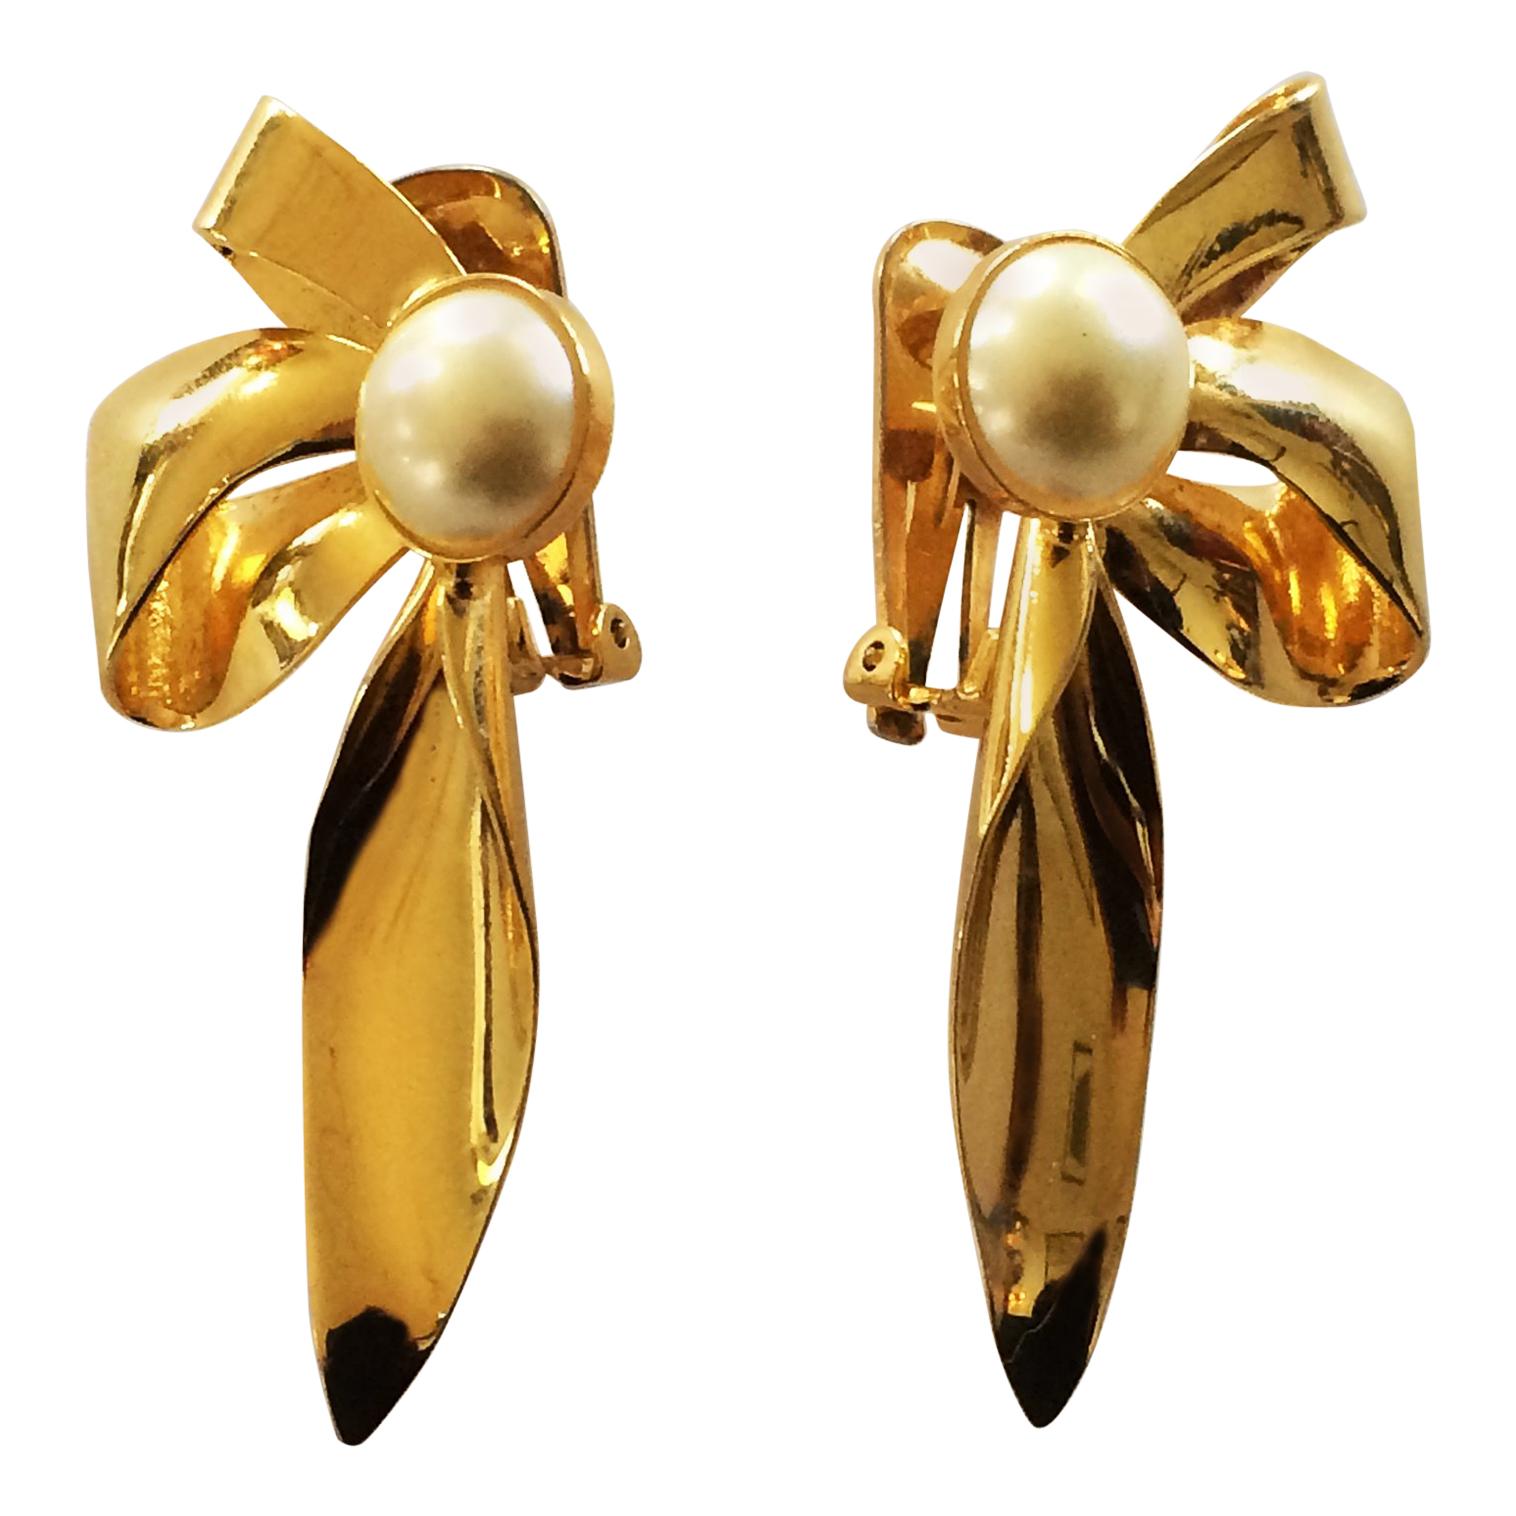 Christian Dior 1950s gilt bow and pearl earrings